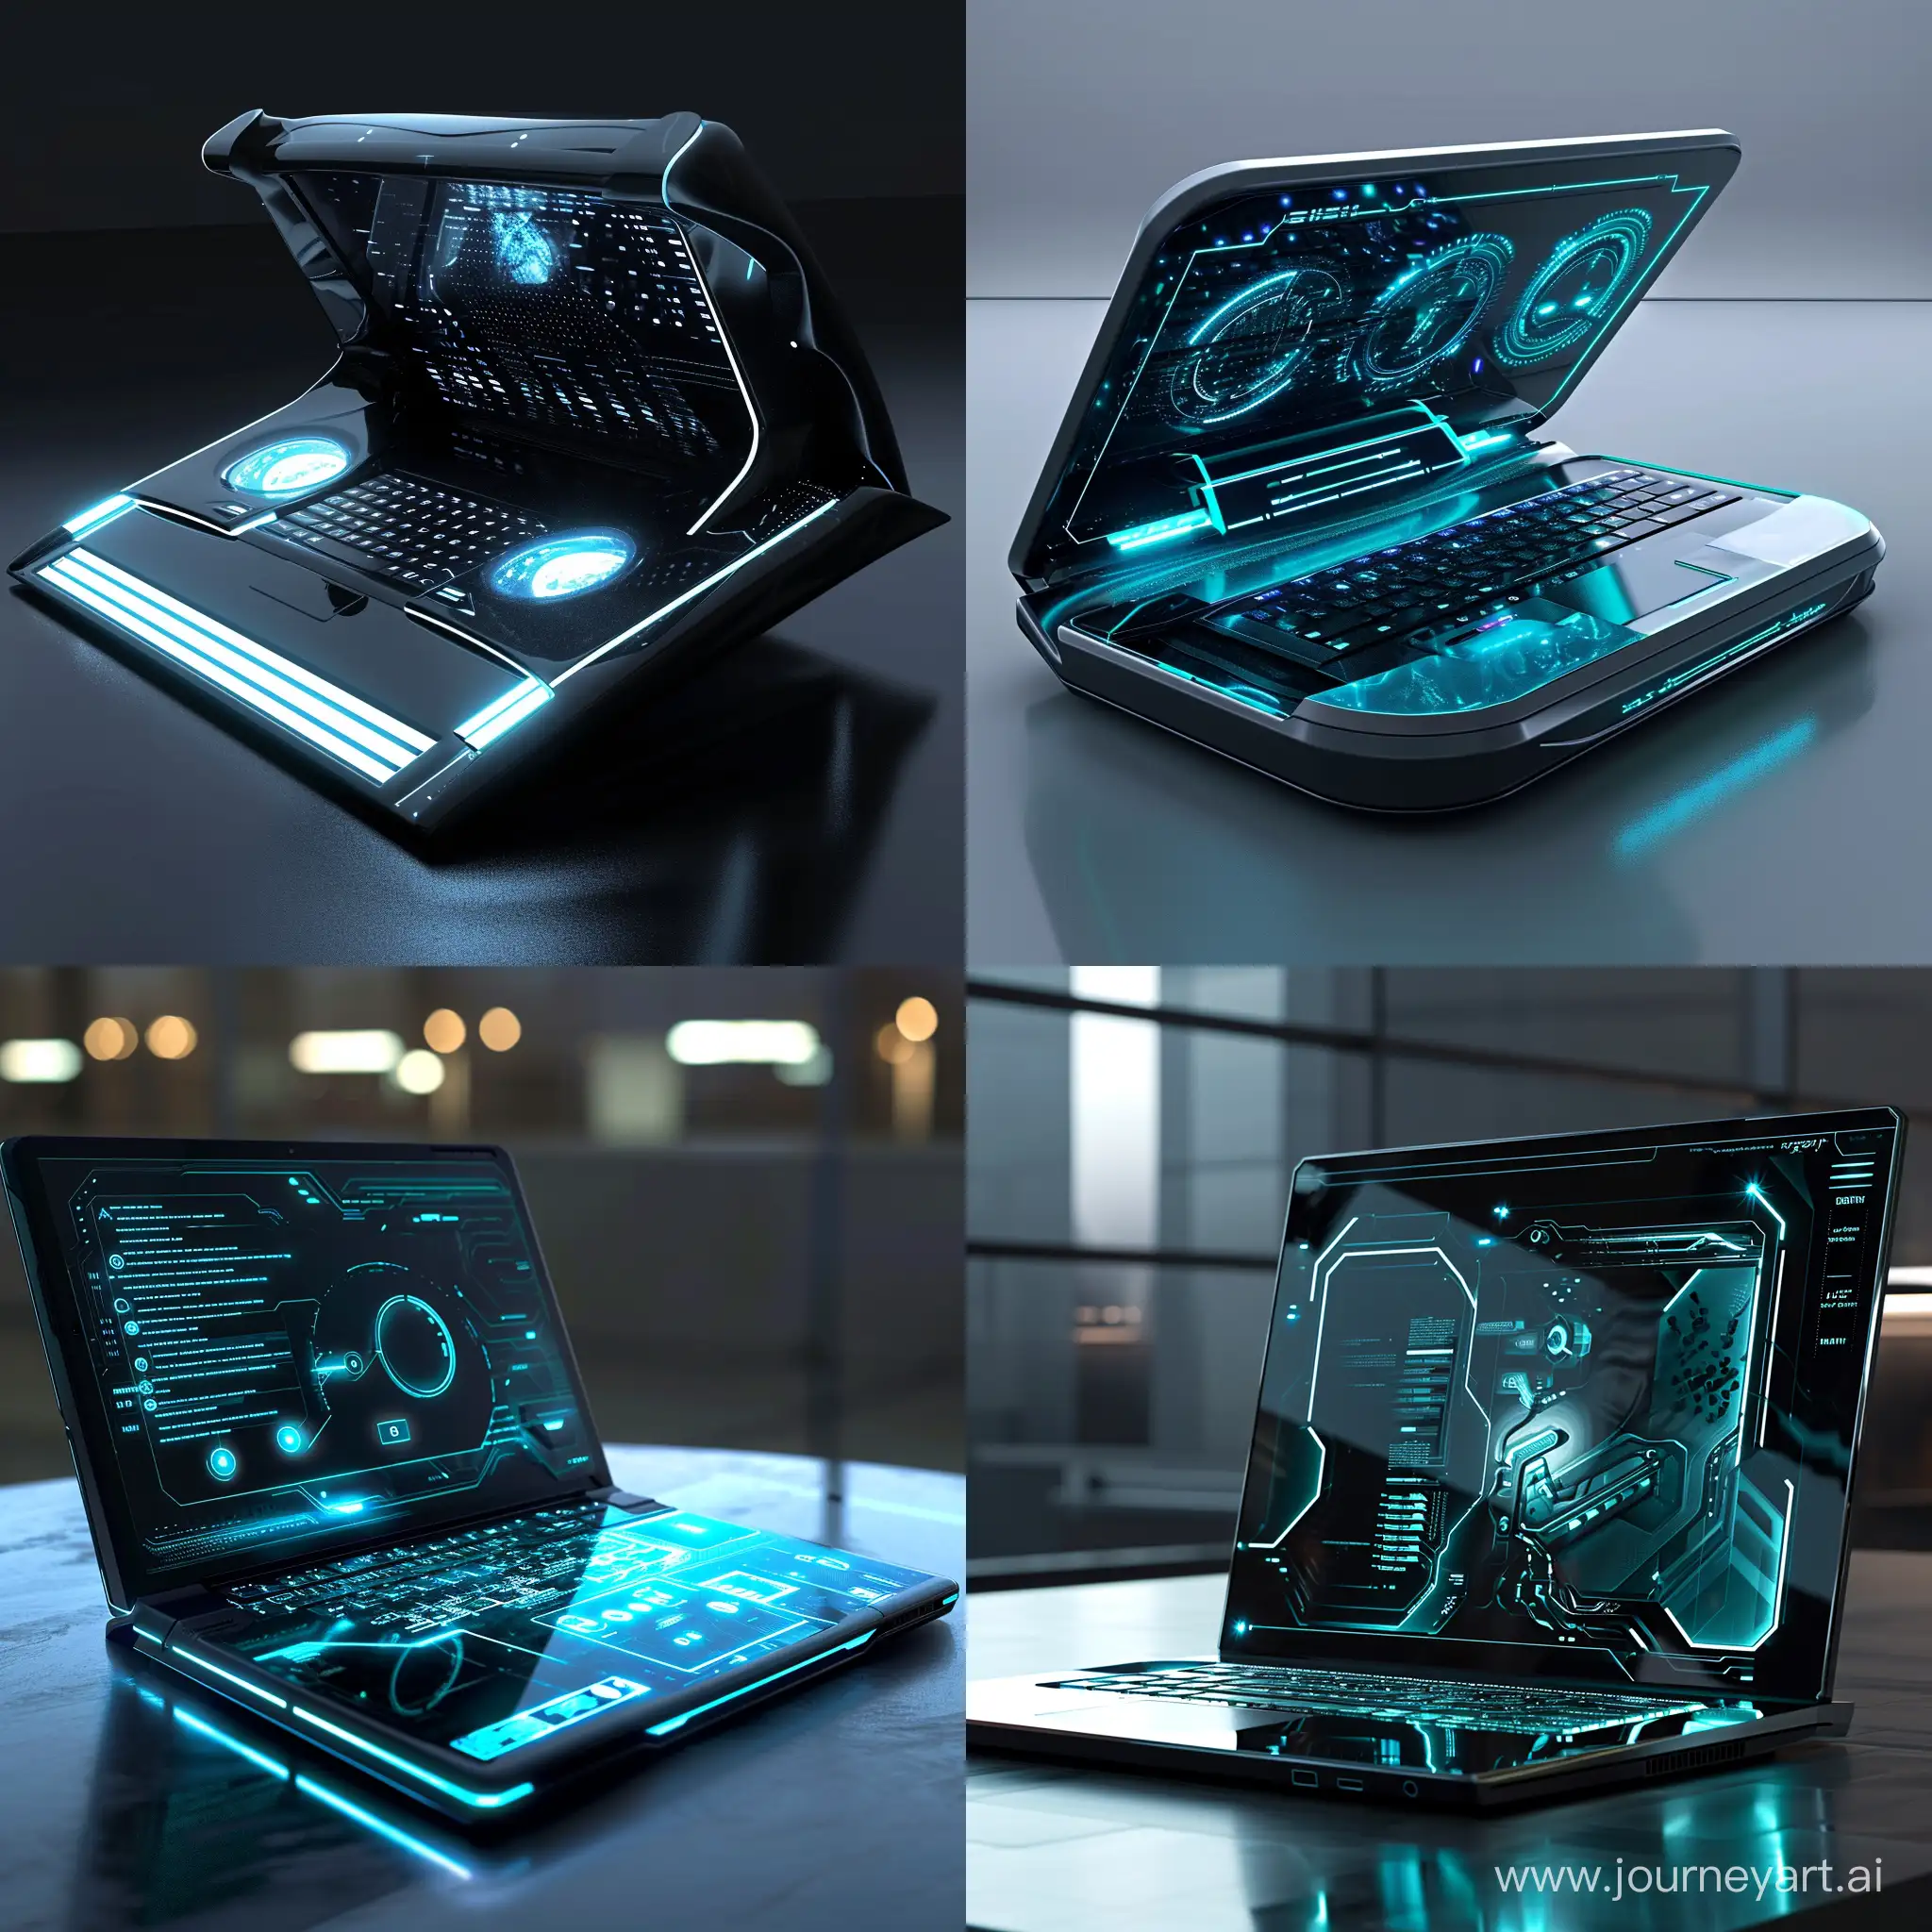 Futuristic-Laptop-with-6th-Version-and-11-Aspect-Ratio-CuttingEdge-Technology